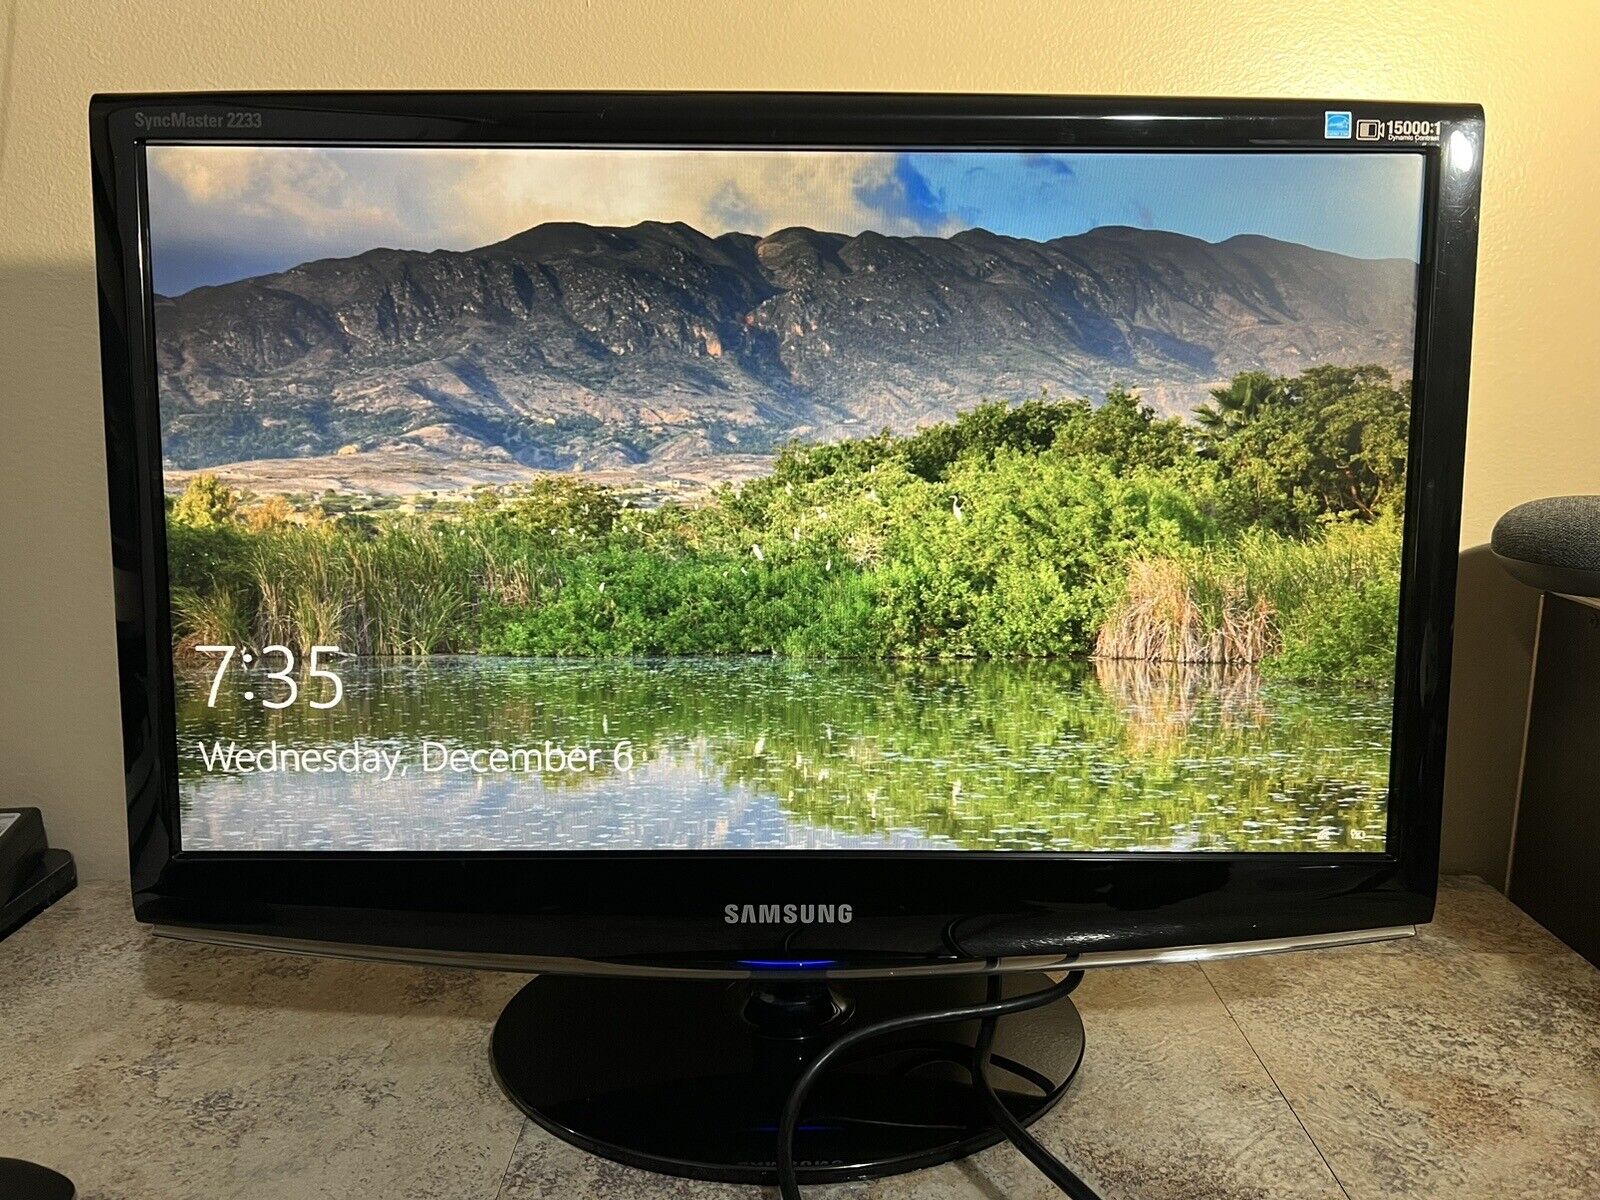 Samsung SyncMaster 2233SW Series Business Monitor Widescreen 15000:1